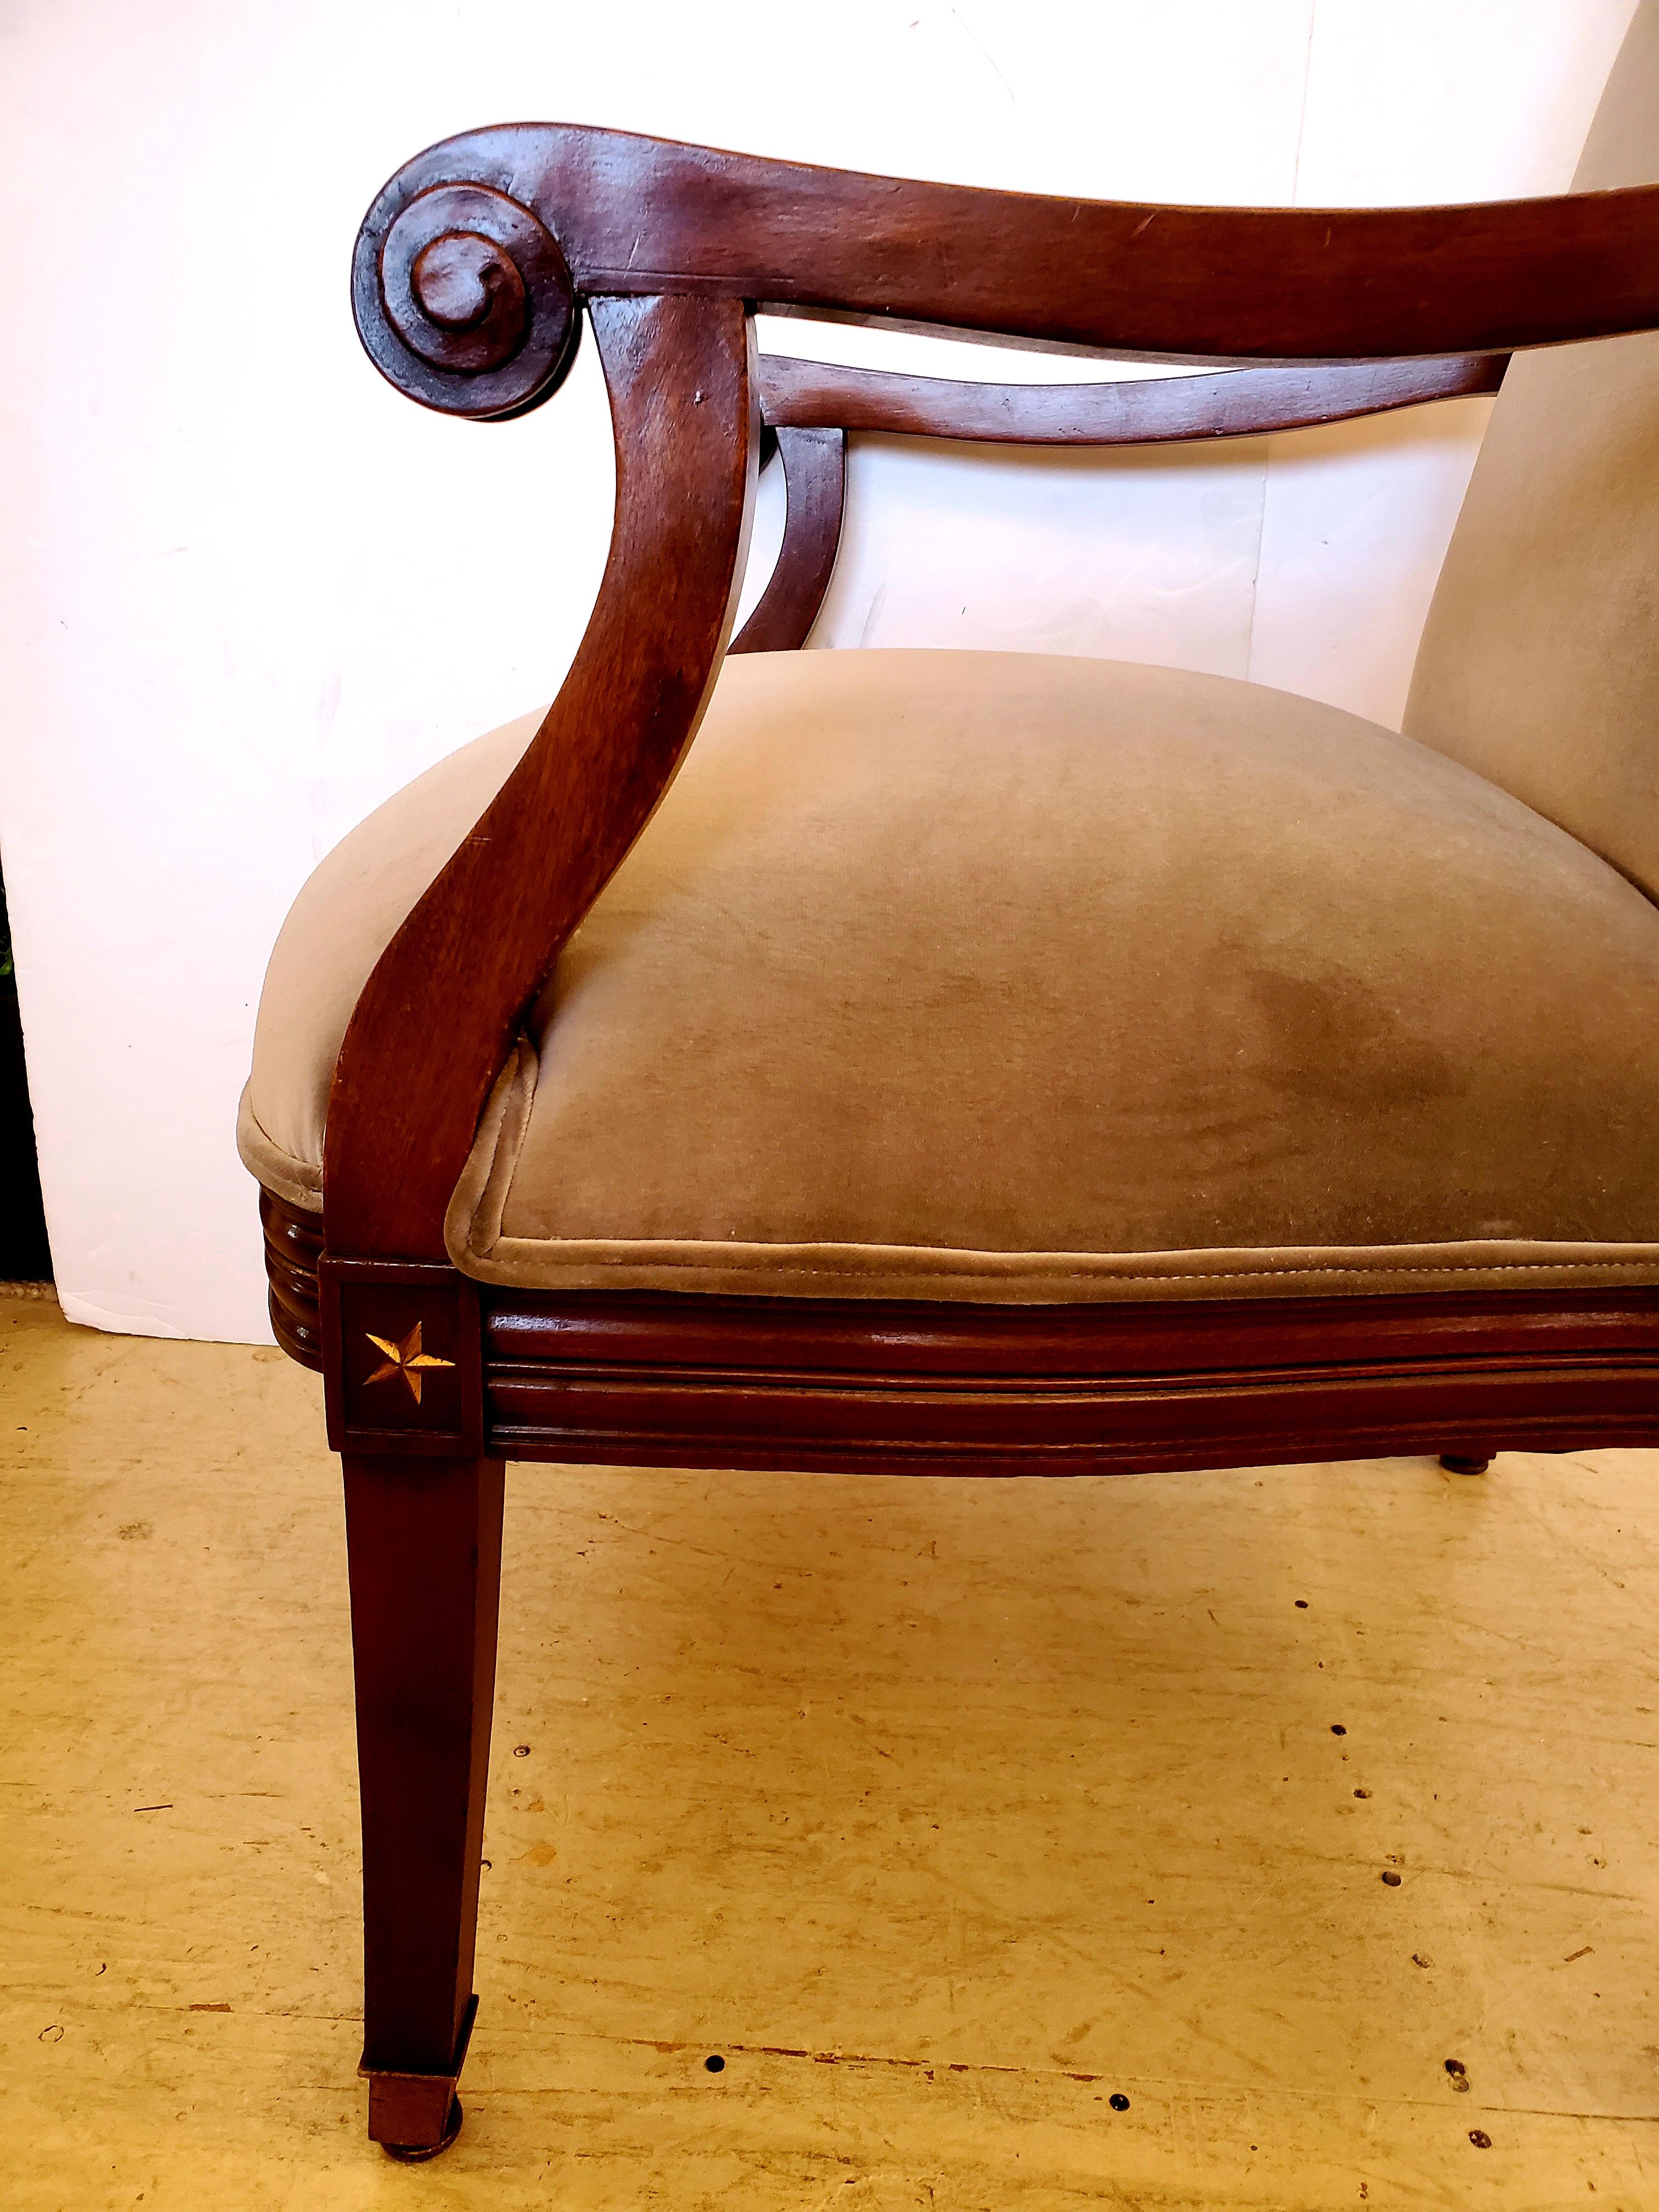 Elegant 19th Century Mahogany Neoclassical Regency Style Arm Chair with Stars 9